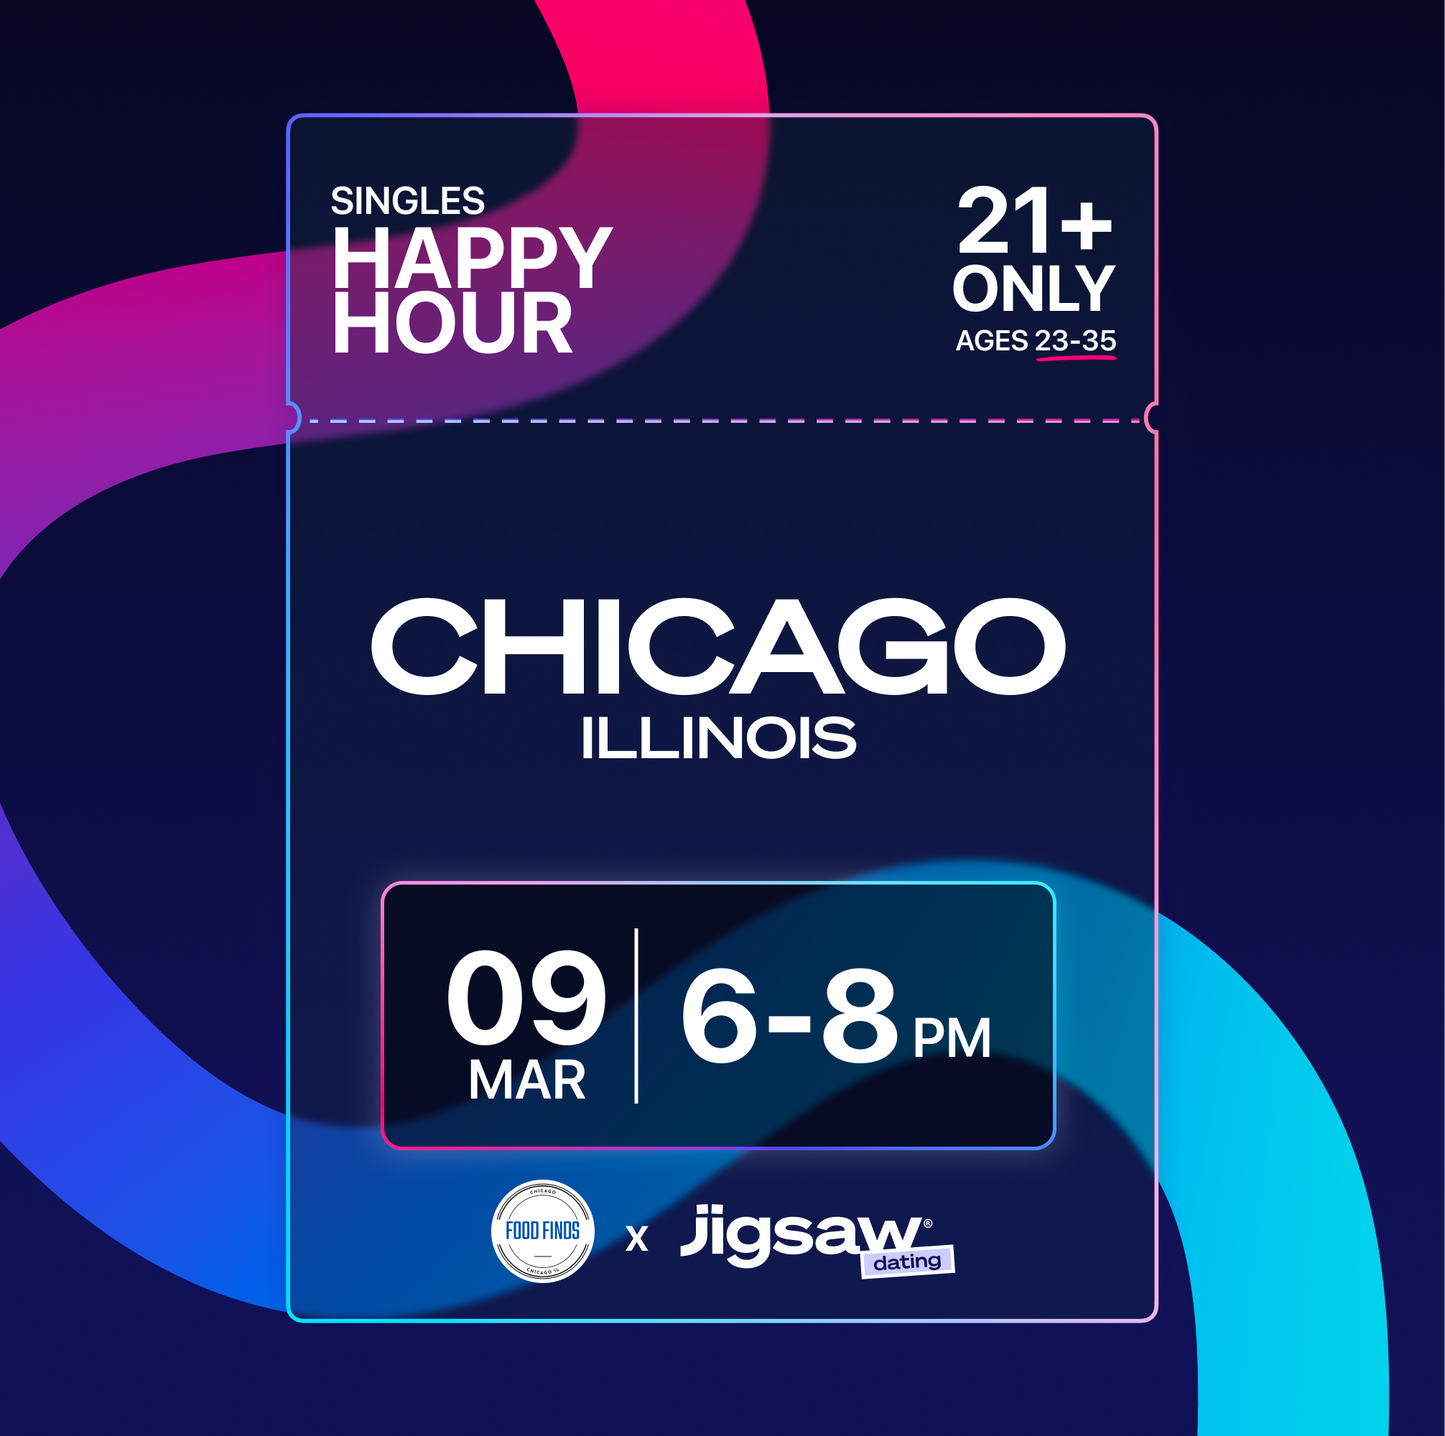 CHICAGO: March Singles Happy Hour